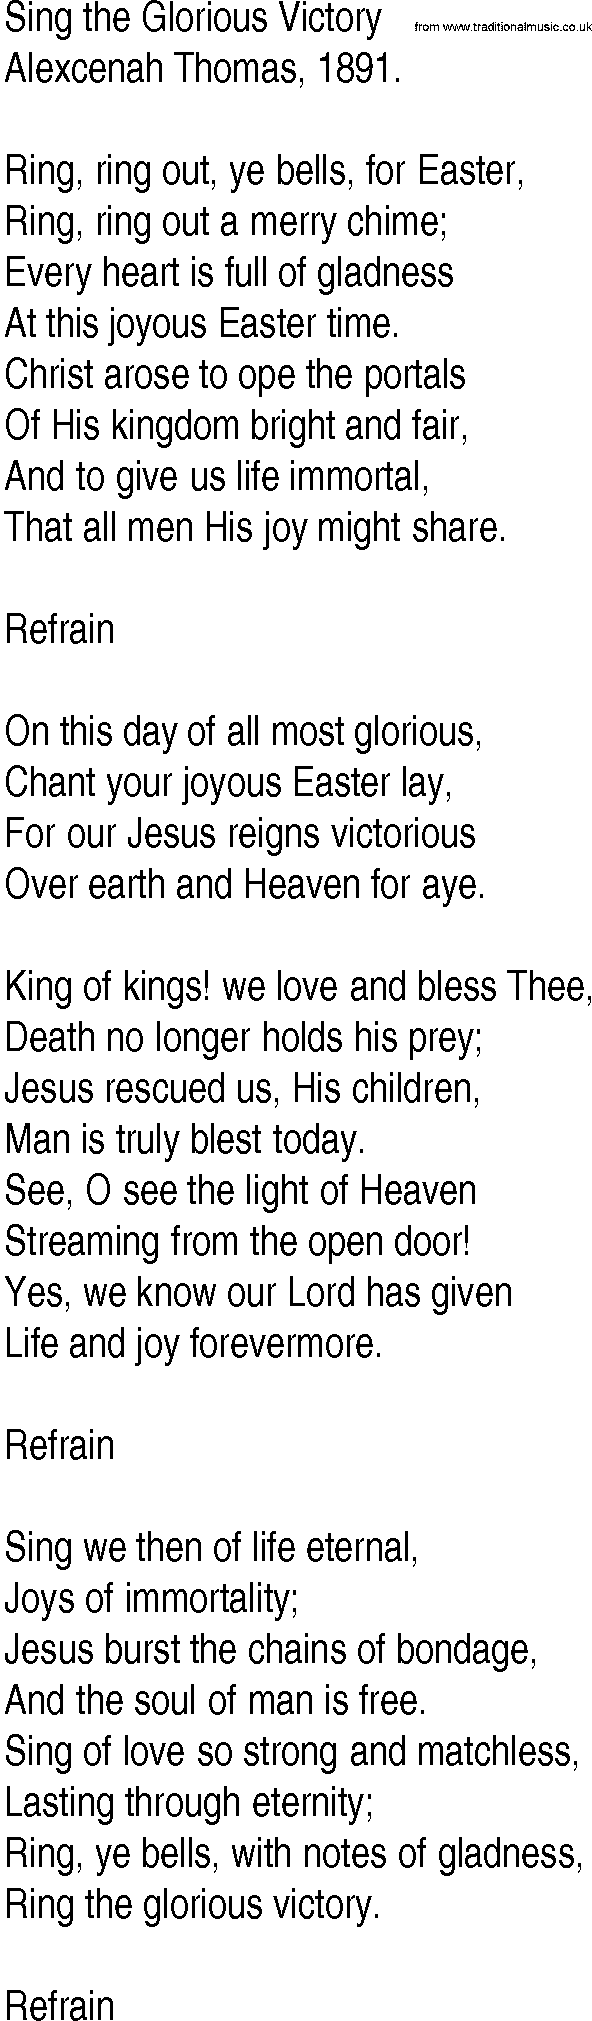 Hymn and Gospel Song: Sing the Glorious Victory by Alexcenah Thomas lyrics